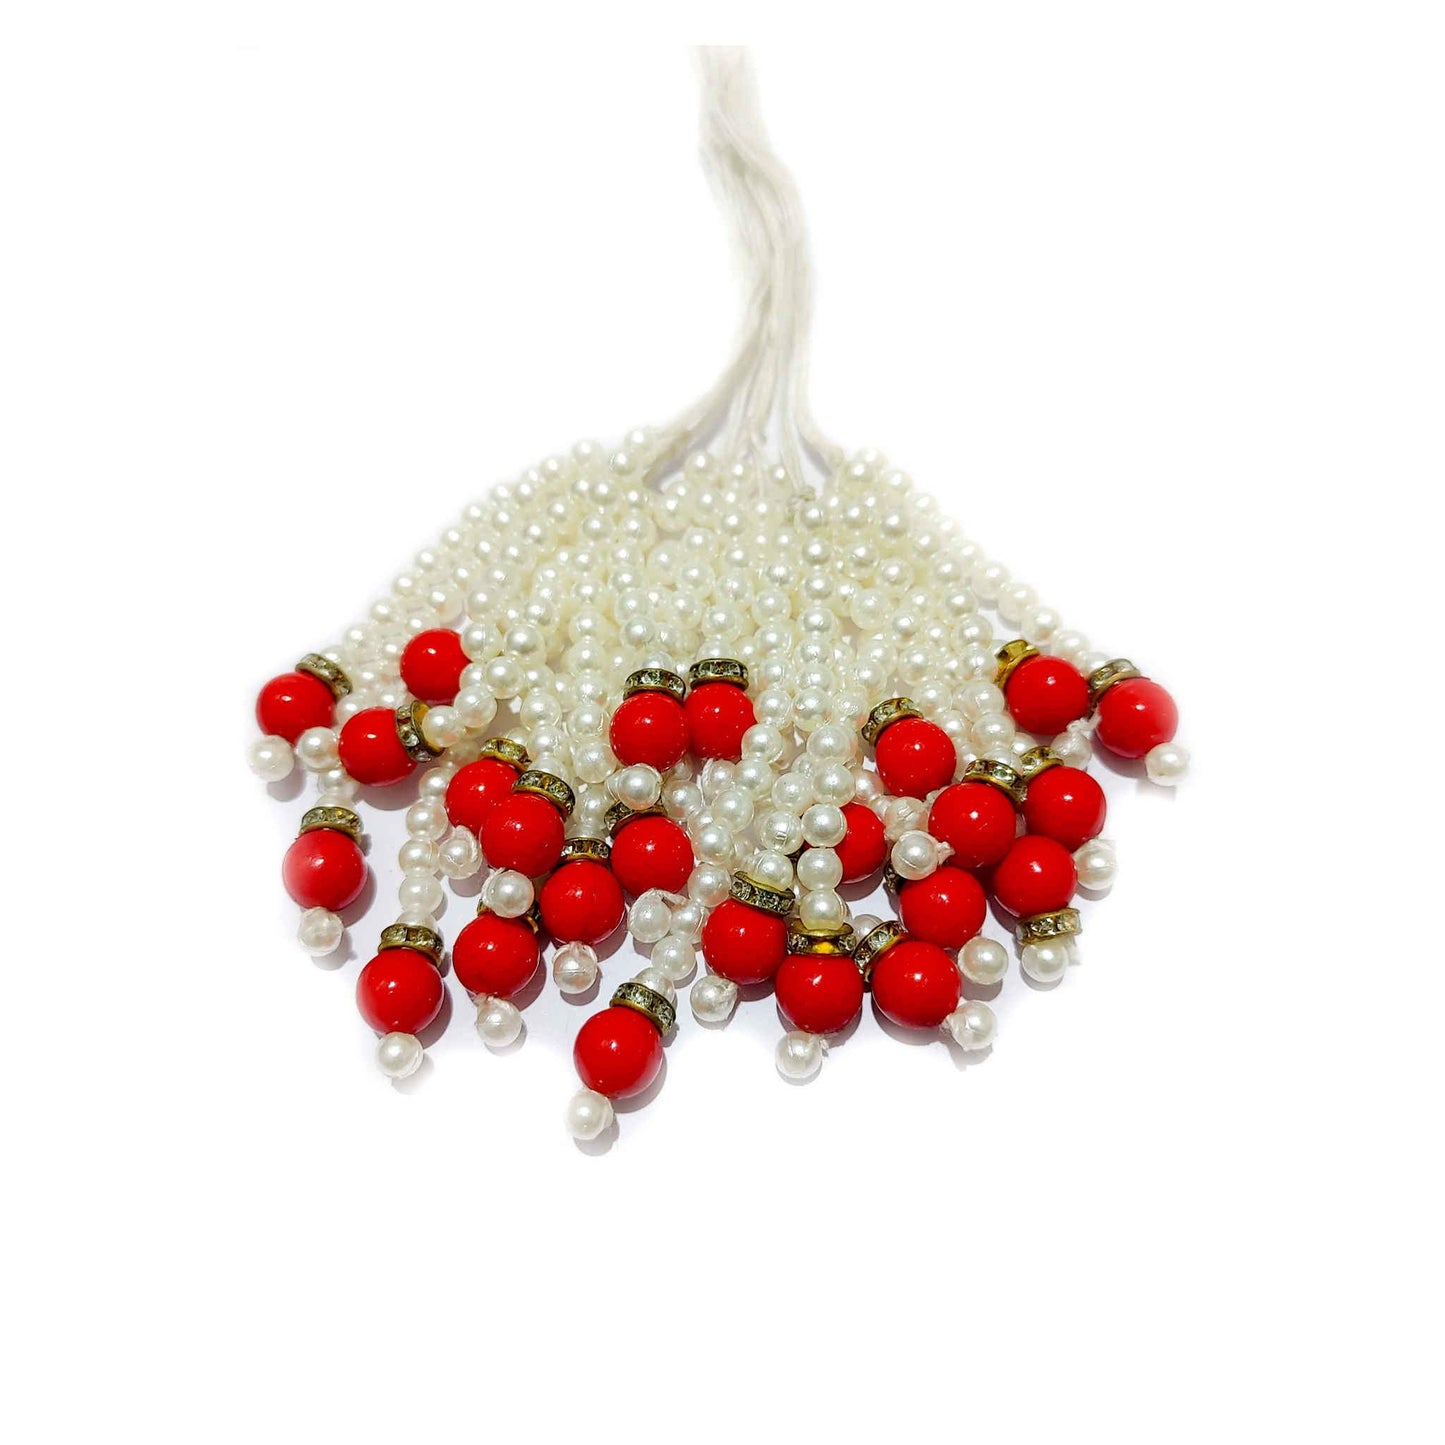 Indian Petals Small Pearl Beads with Red Bead and Diamond Ring Handmade DIY Craft, Jewelry Tassel - Design 818